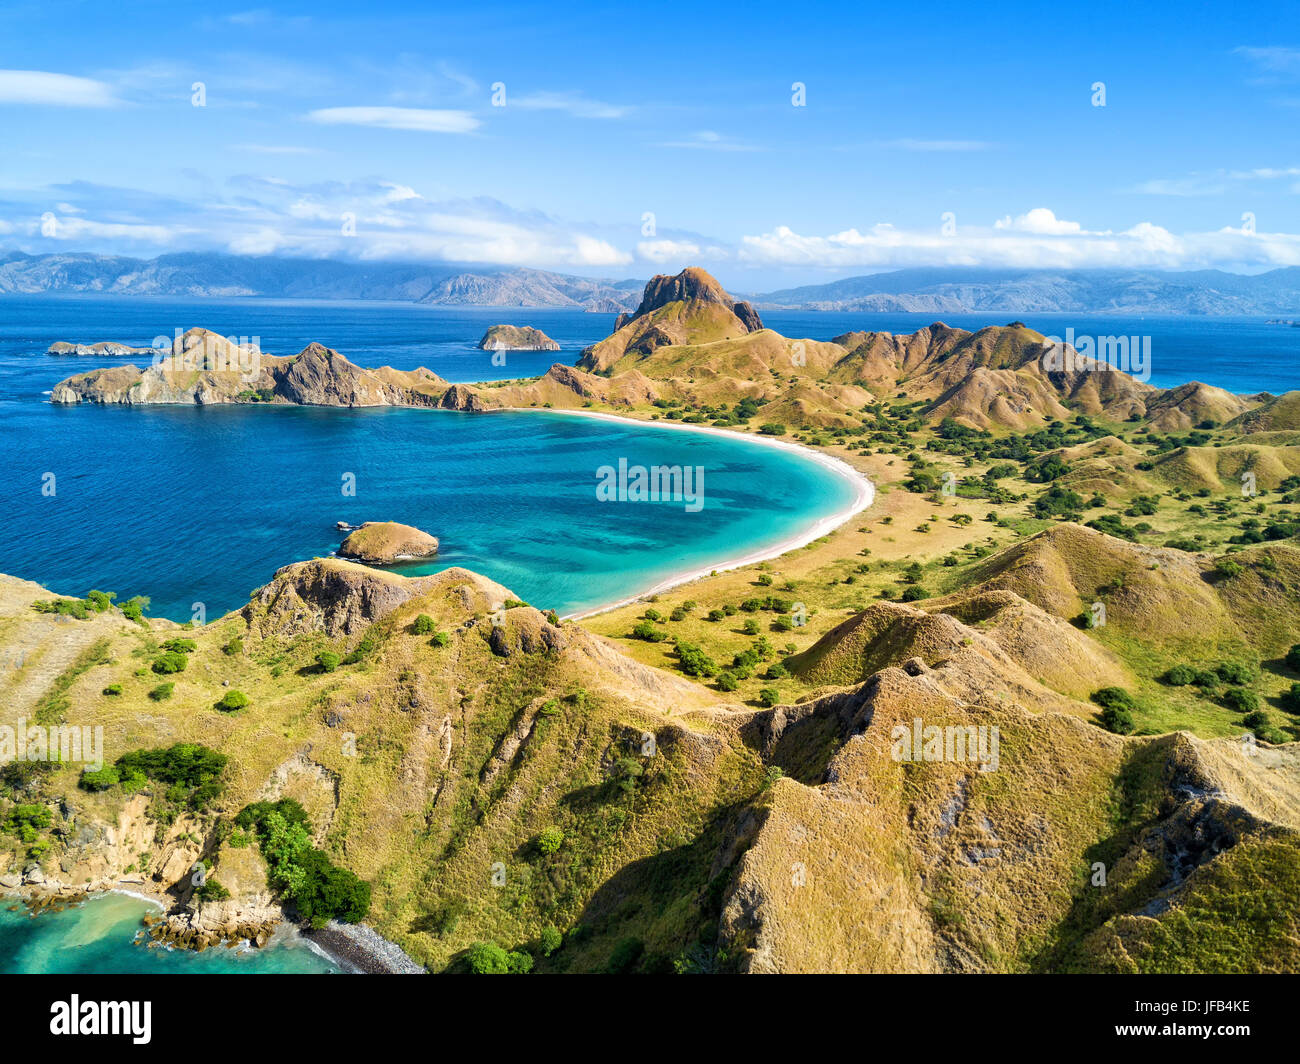 Aerial view of a small bay and hills on Pulau Padar island in between ...